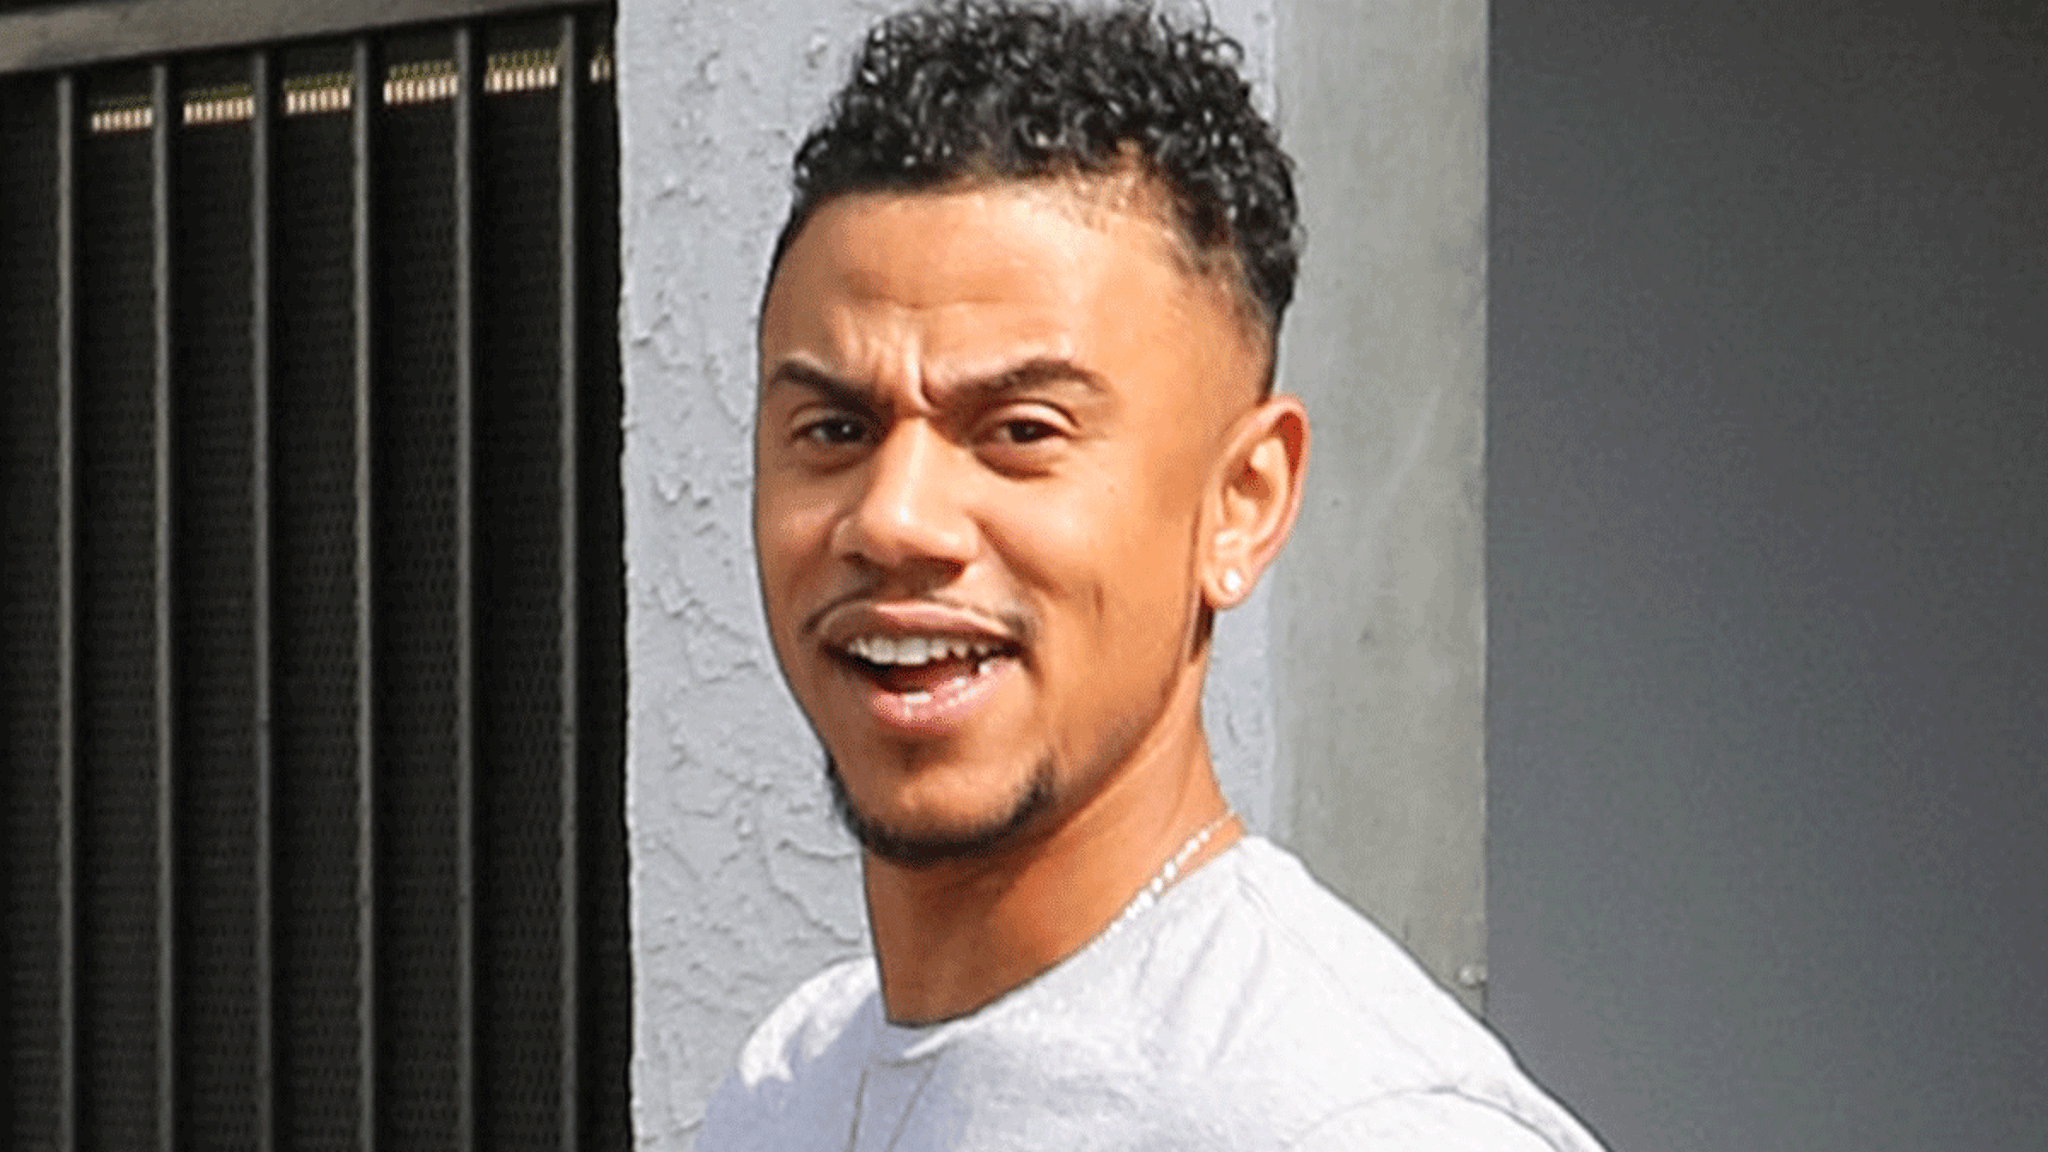 Lil Fizz denies being a person in viral nude video